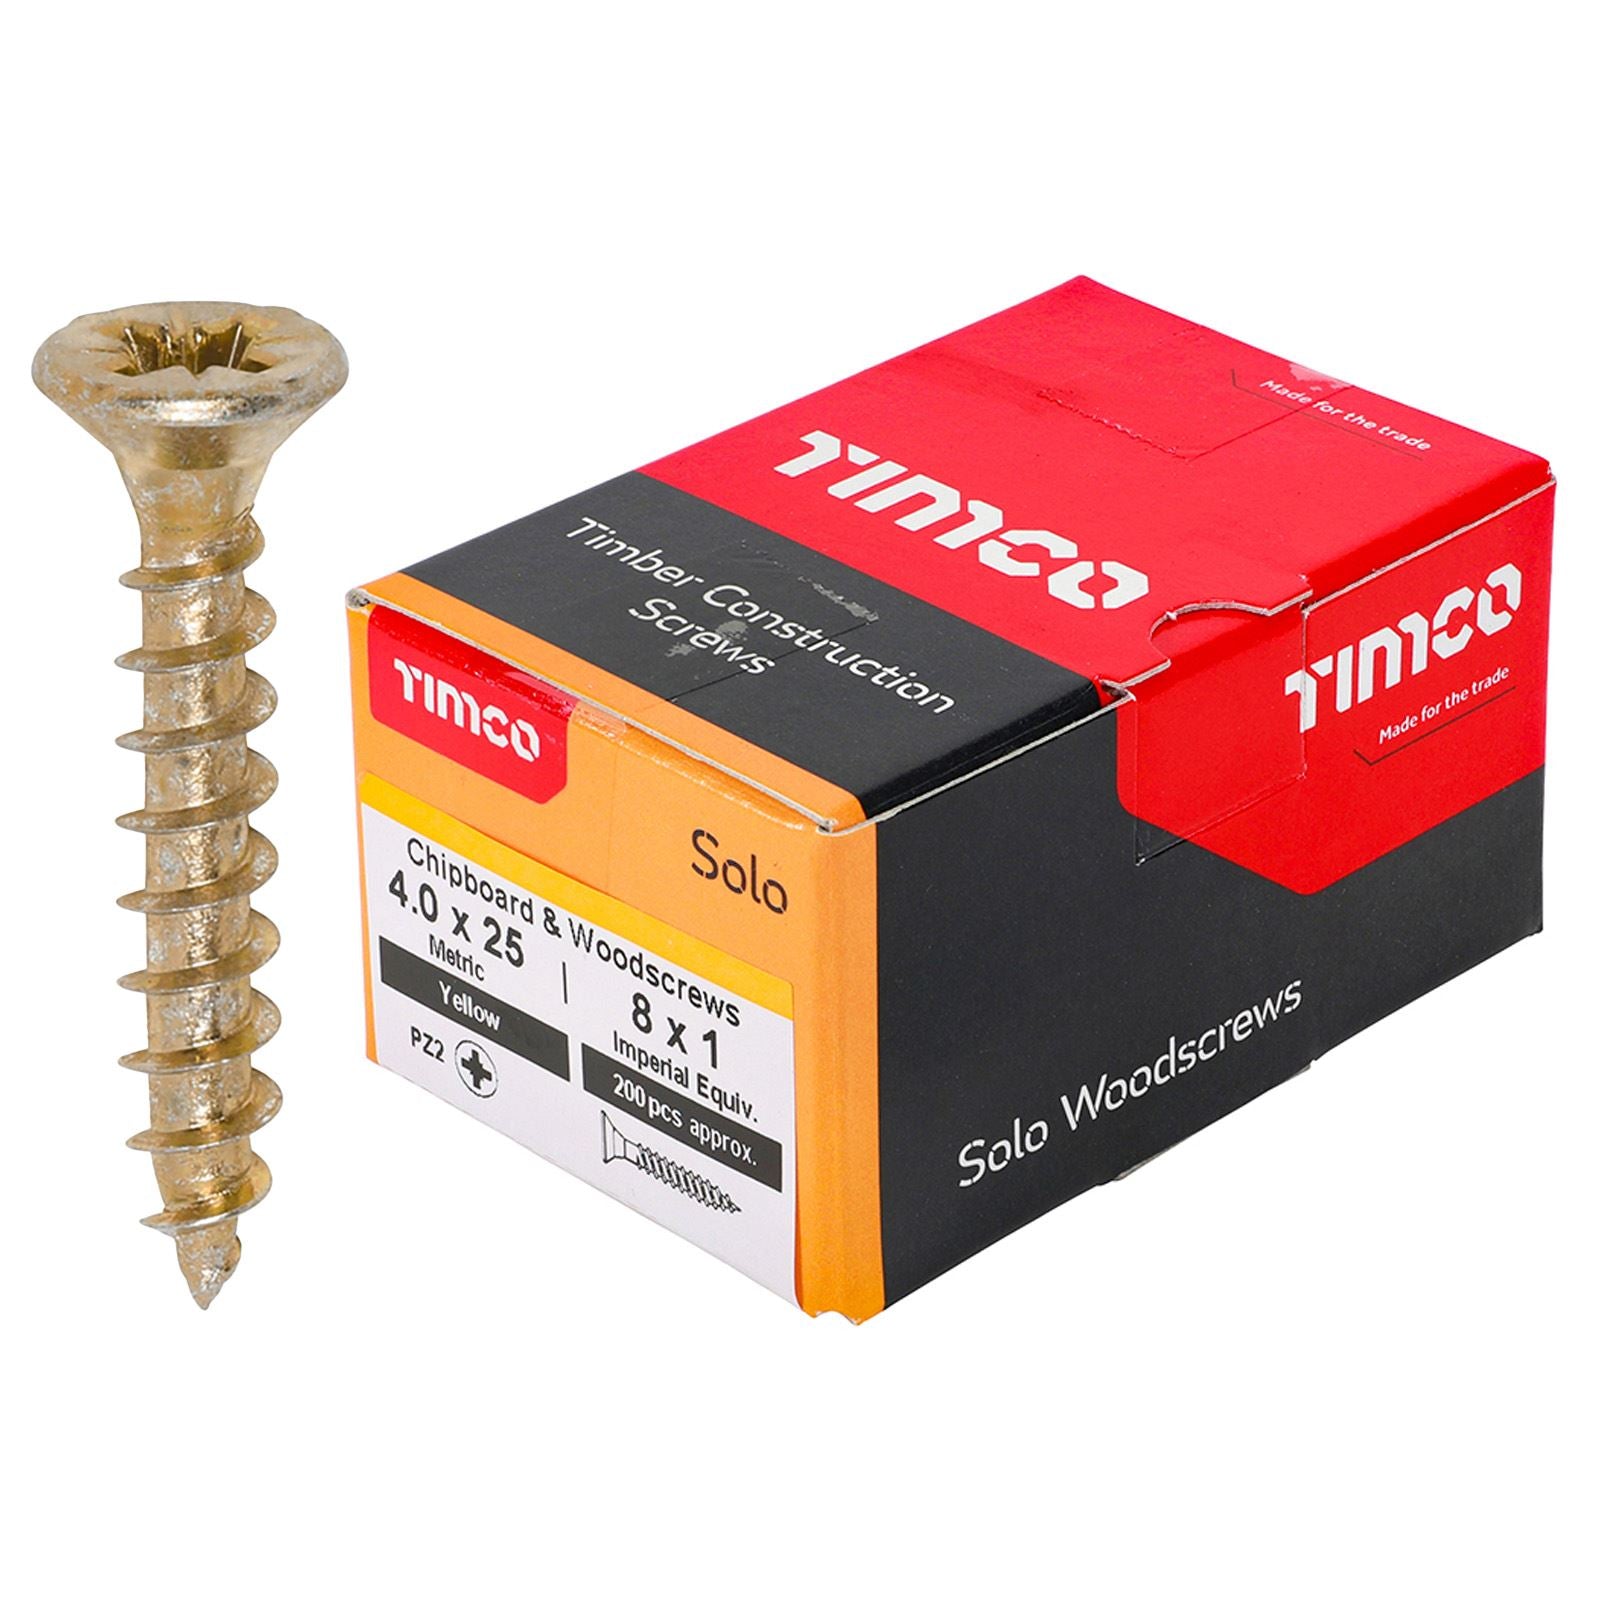 TIMCO SOLO Wood Screws Yellow Double Countersunk Pozi Boxed - Choose Size